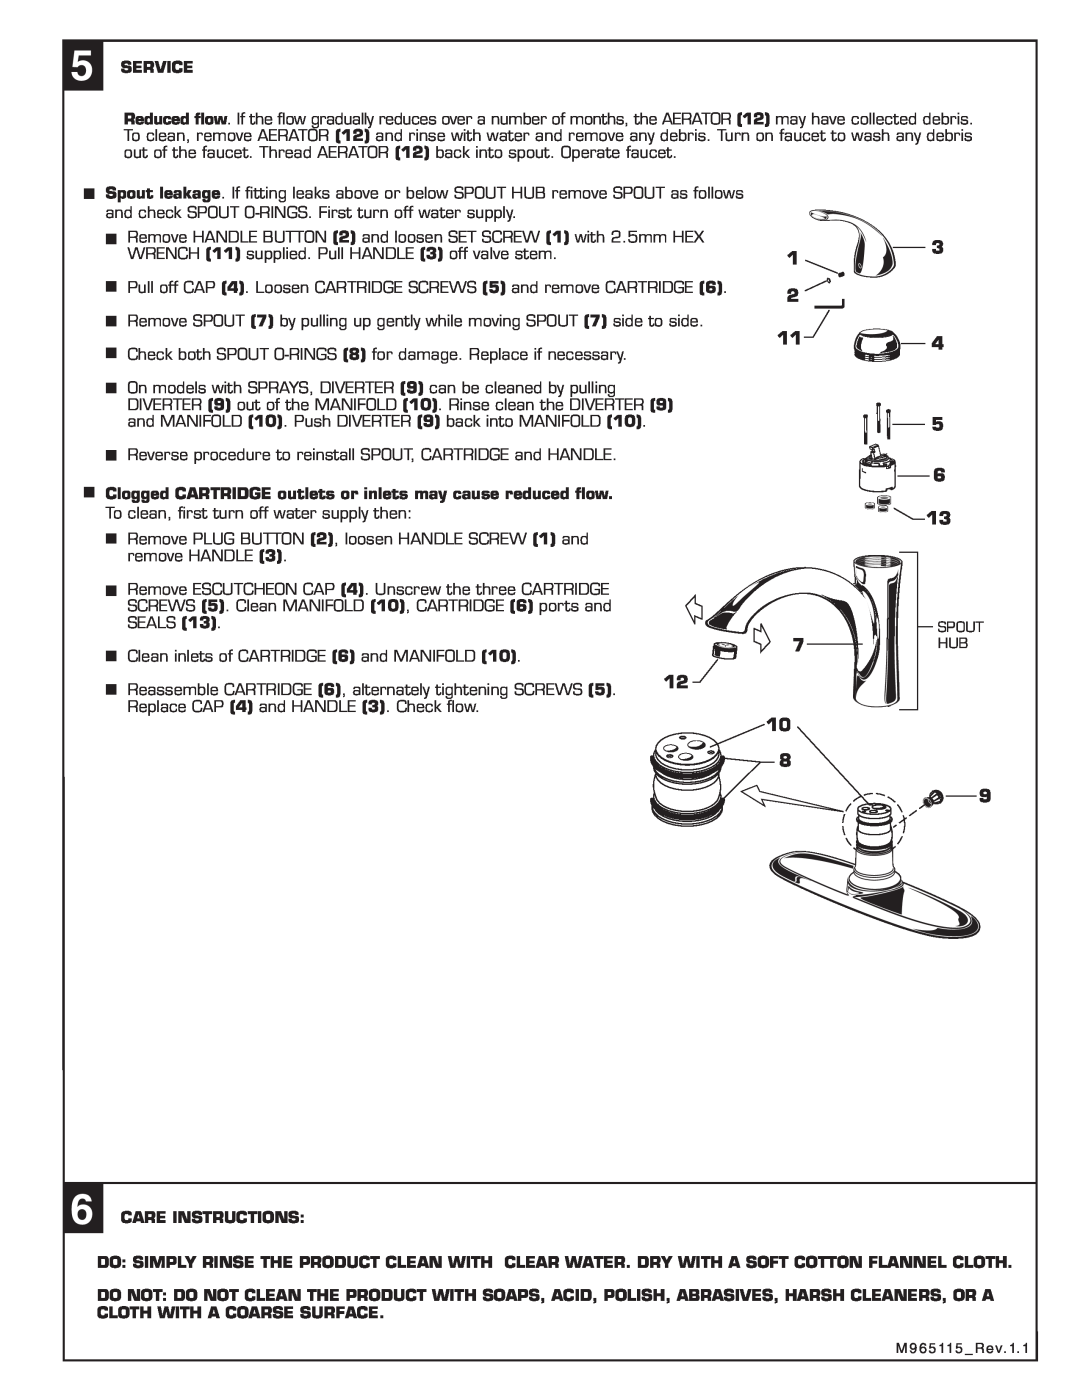 American Standard 4433.001 Service, Clogged CARTRIDGE outlets or inlets may cause reduced ﬂow, Care Instructions 